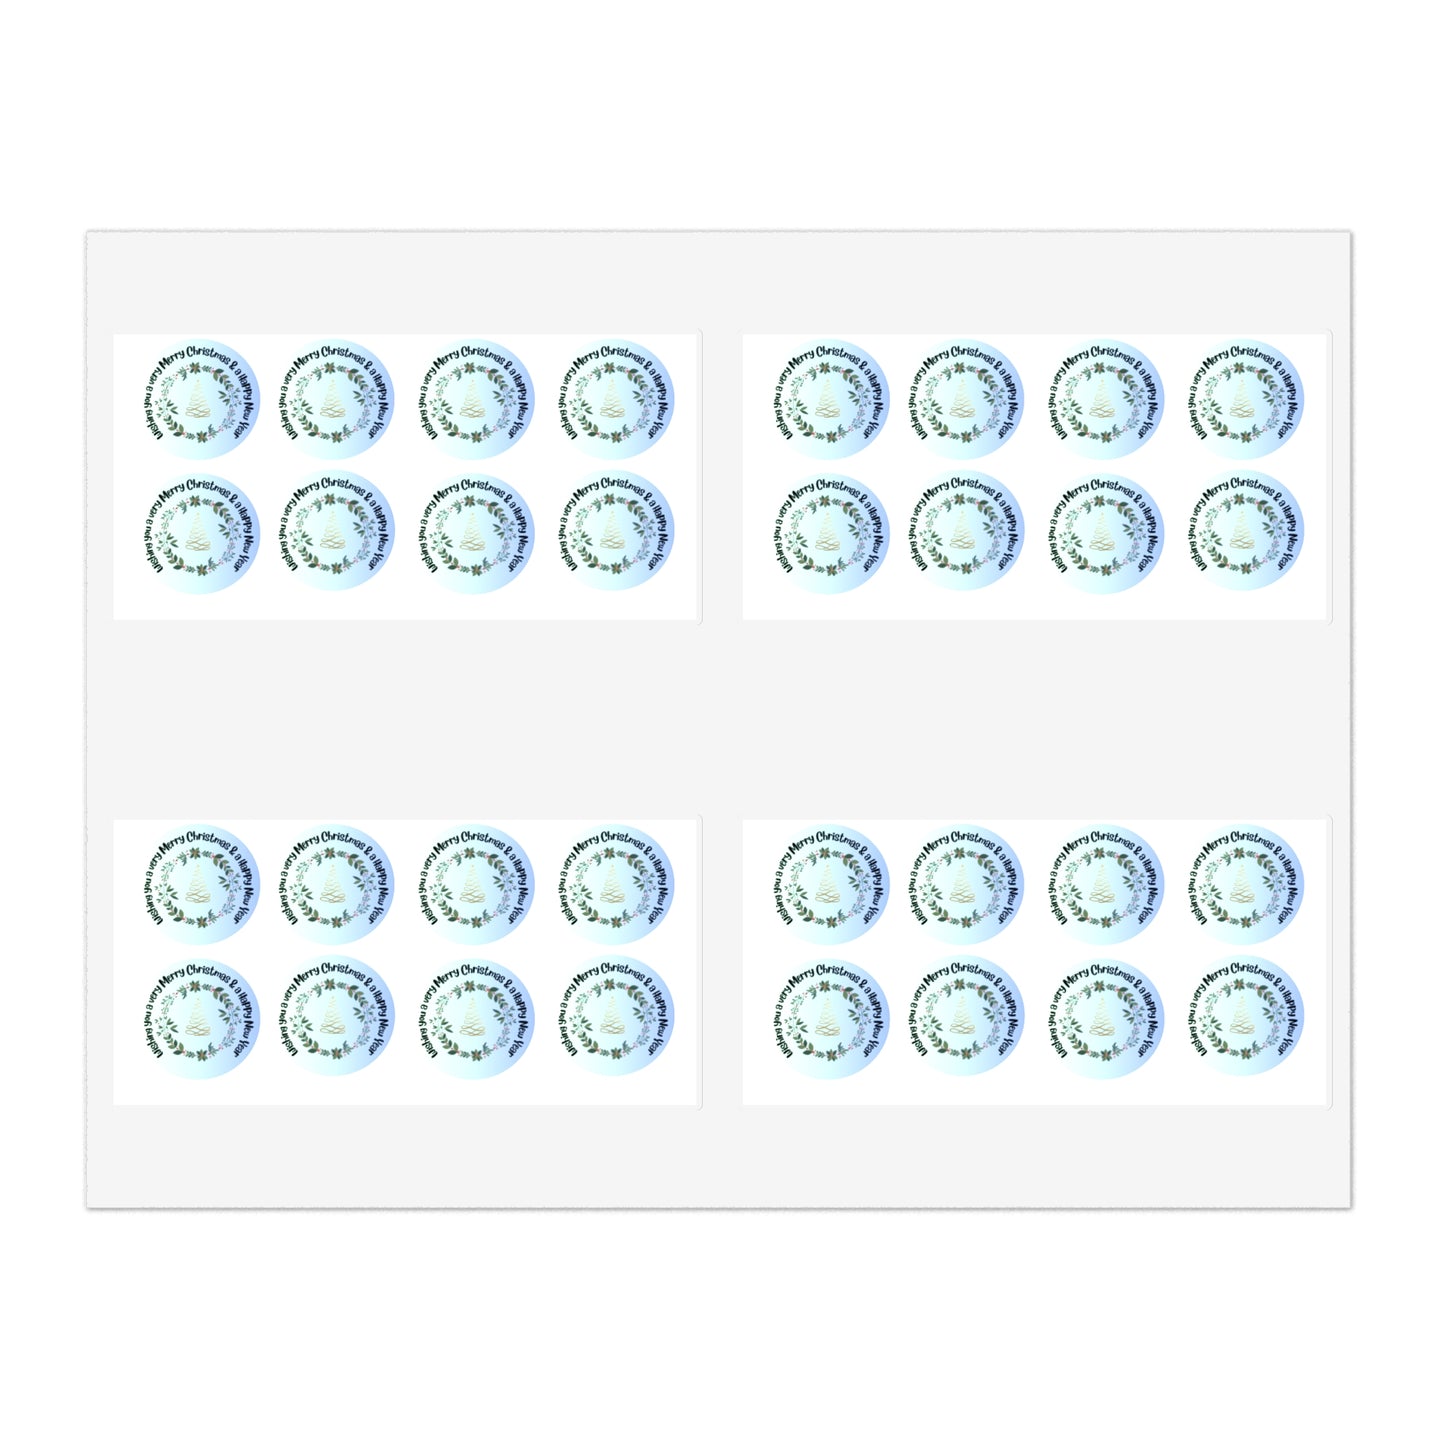 Merry Christmas & Happy New Year Stickers blue trim (32 stickers per 11x8.5 size sheet)